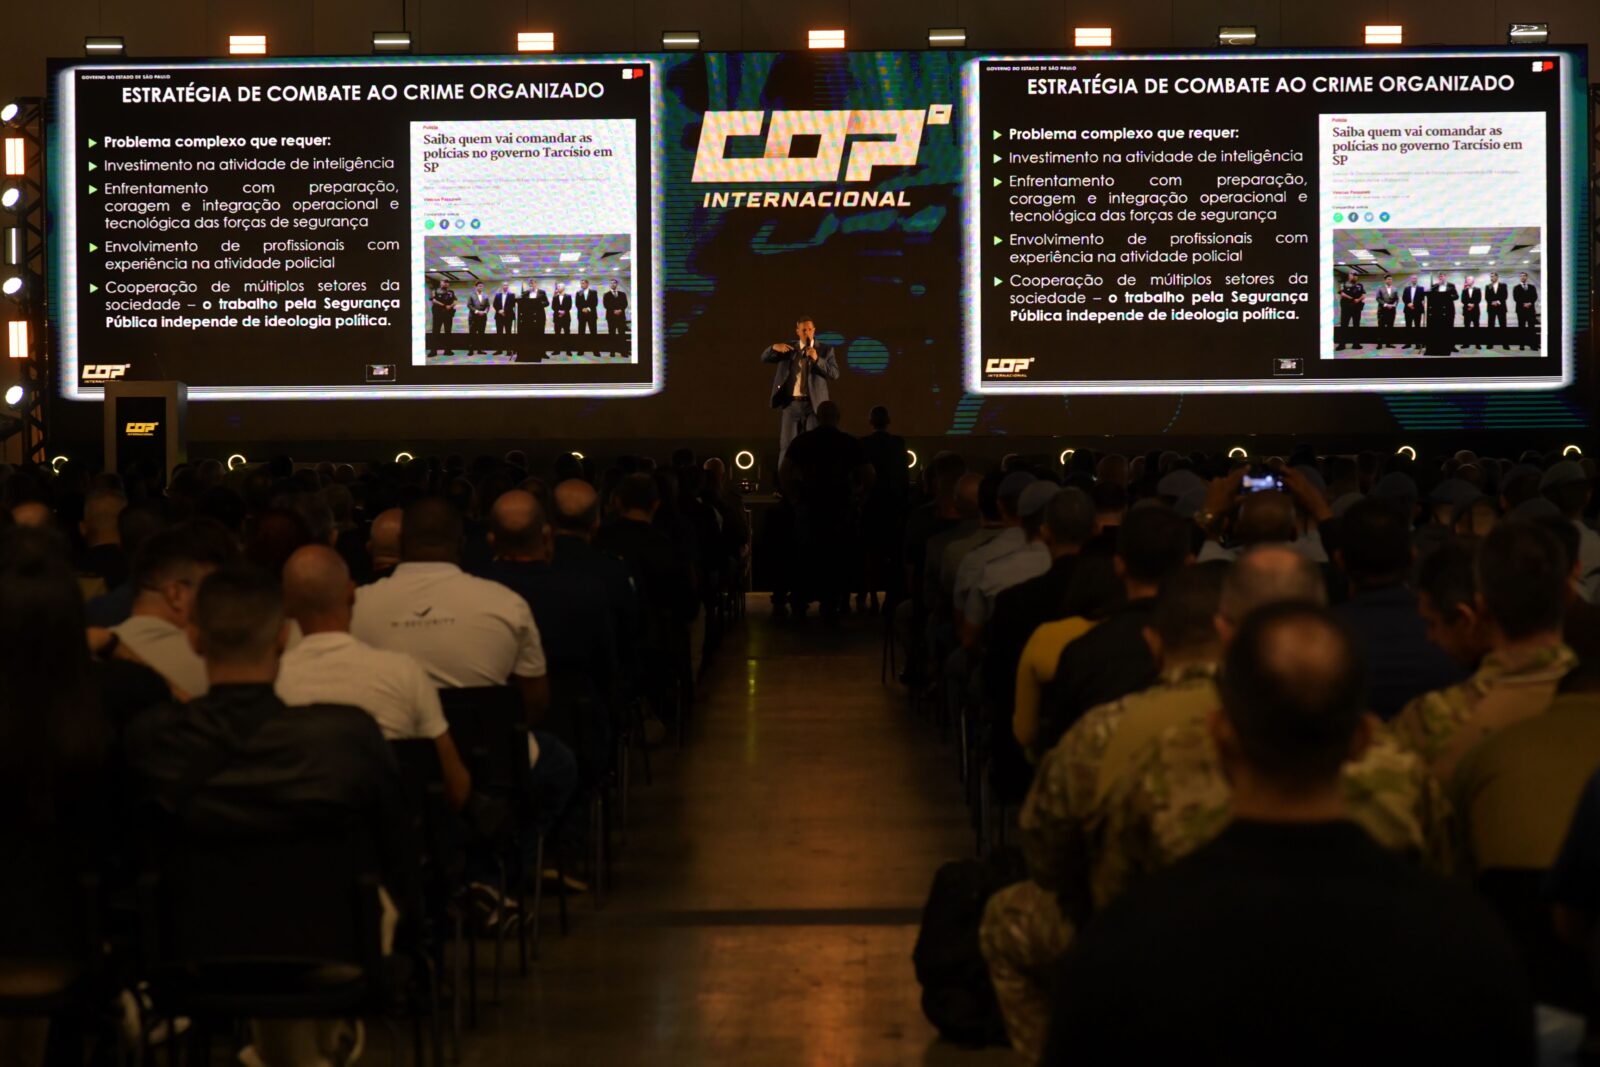 Considered the largest public security event in Latin America, the third edition of the Police Operations Congress - COP International